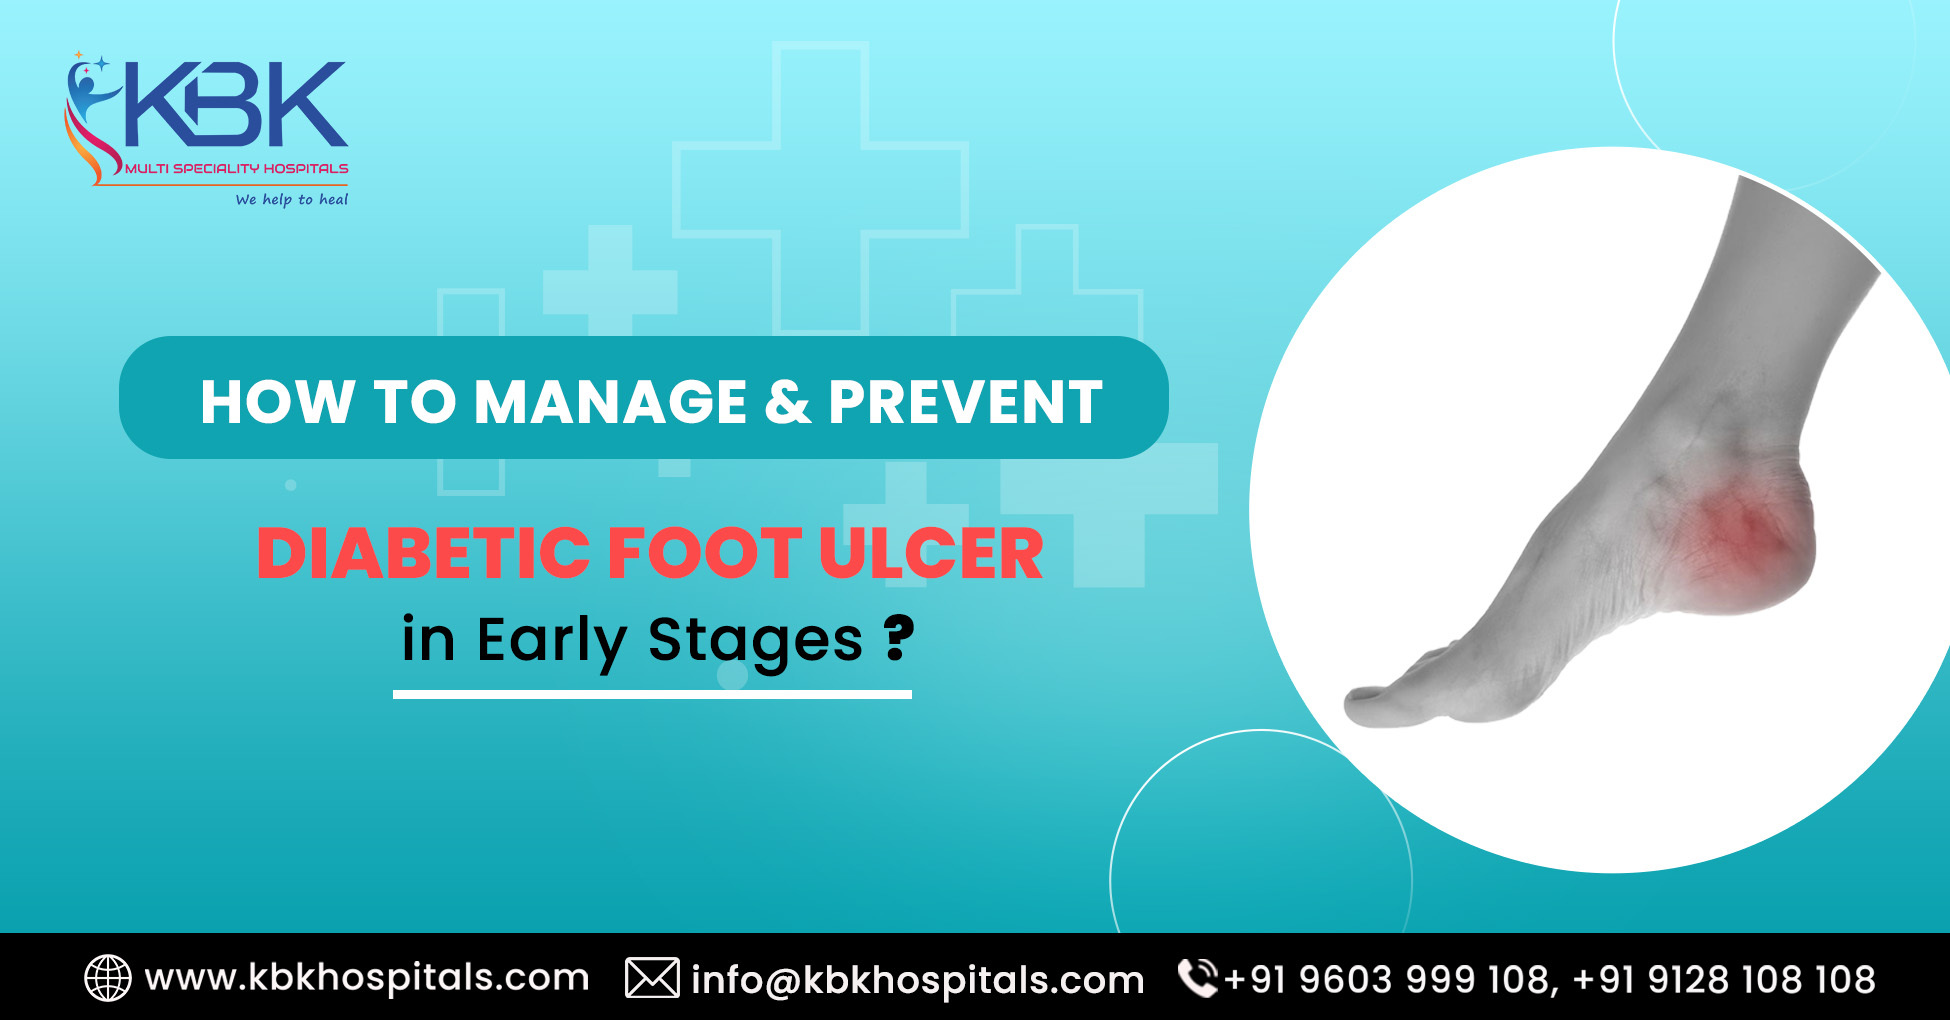 How to manage & prevent Diabetic Foot Ulcer in Early Stages - KBK HOSPITALS BLOG IMAGE 2023.